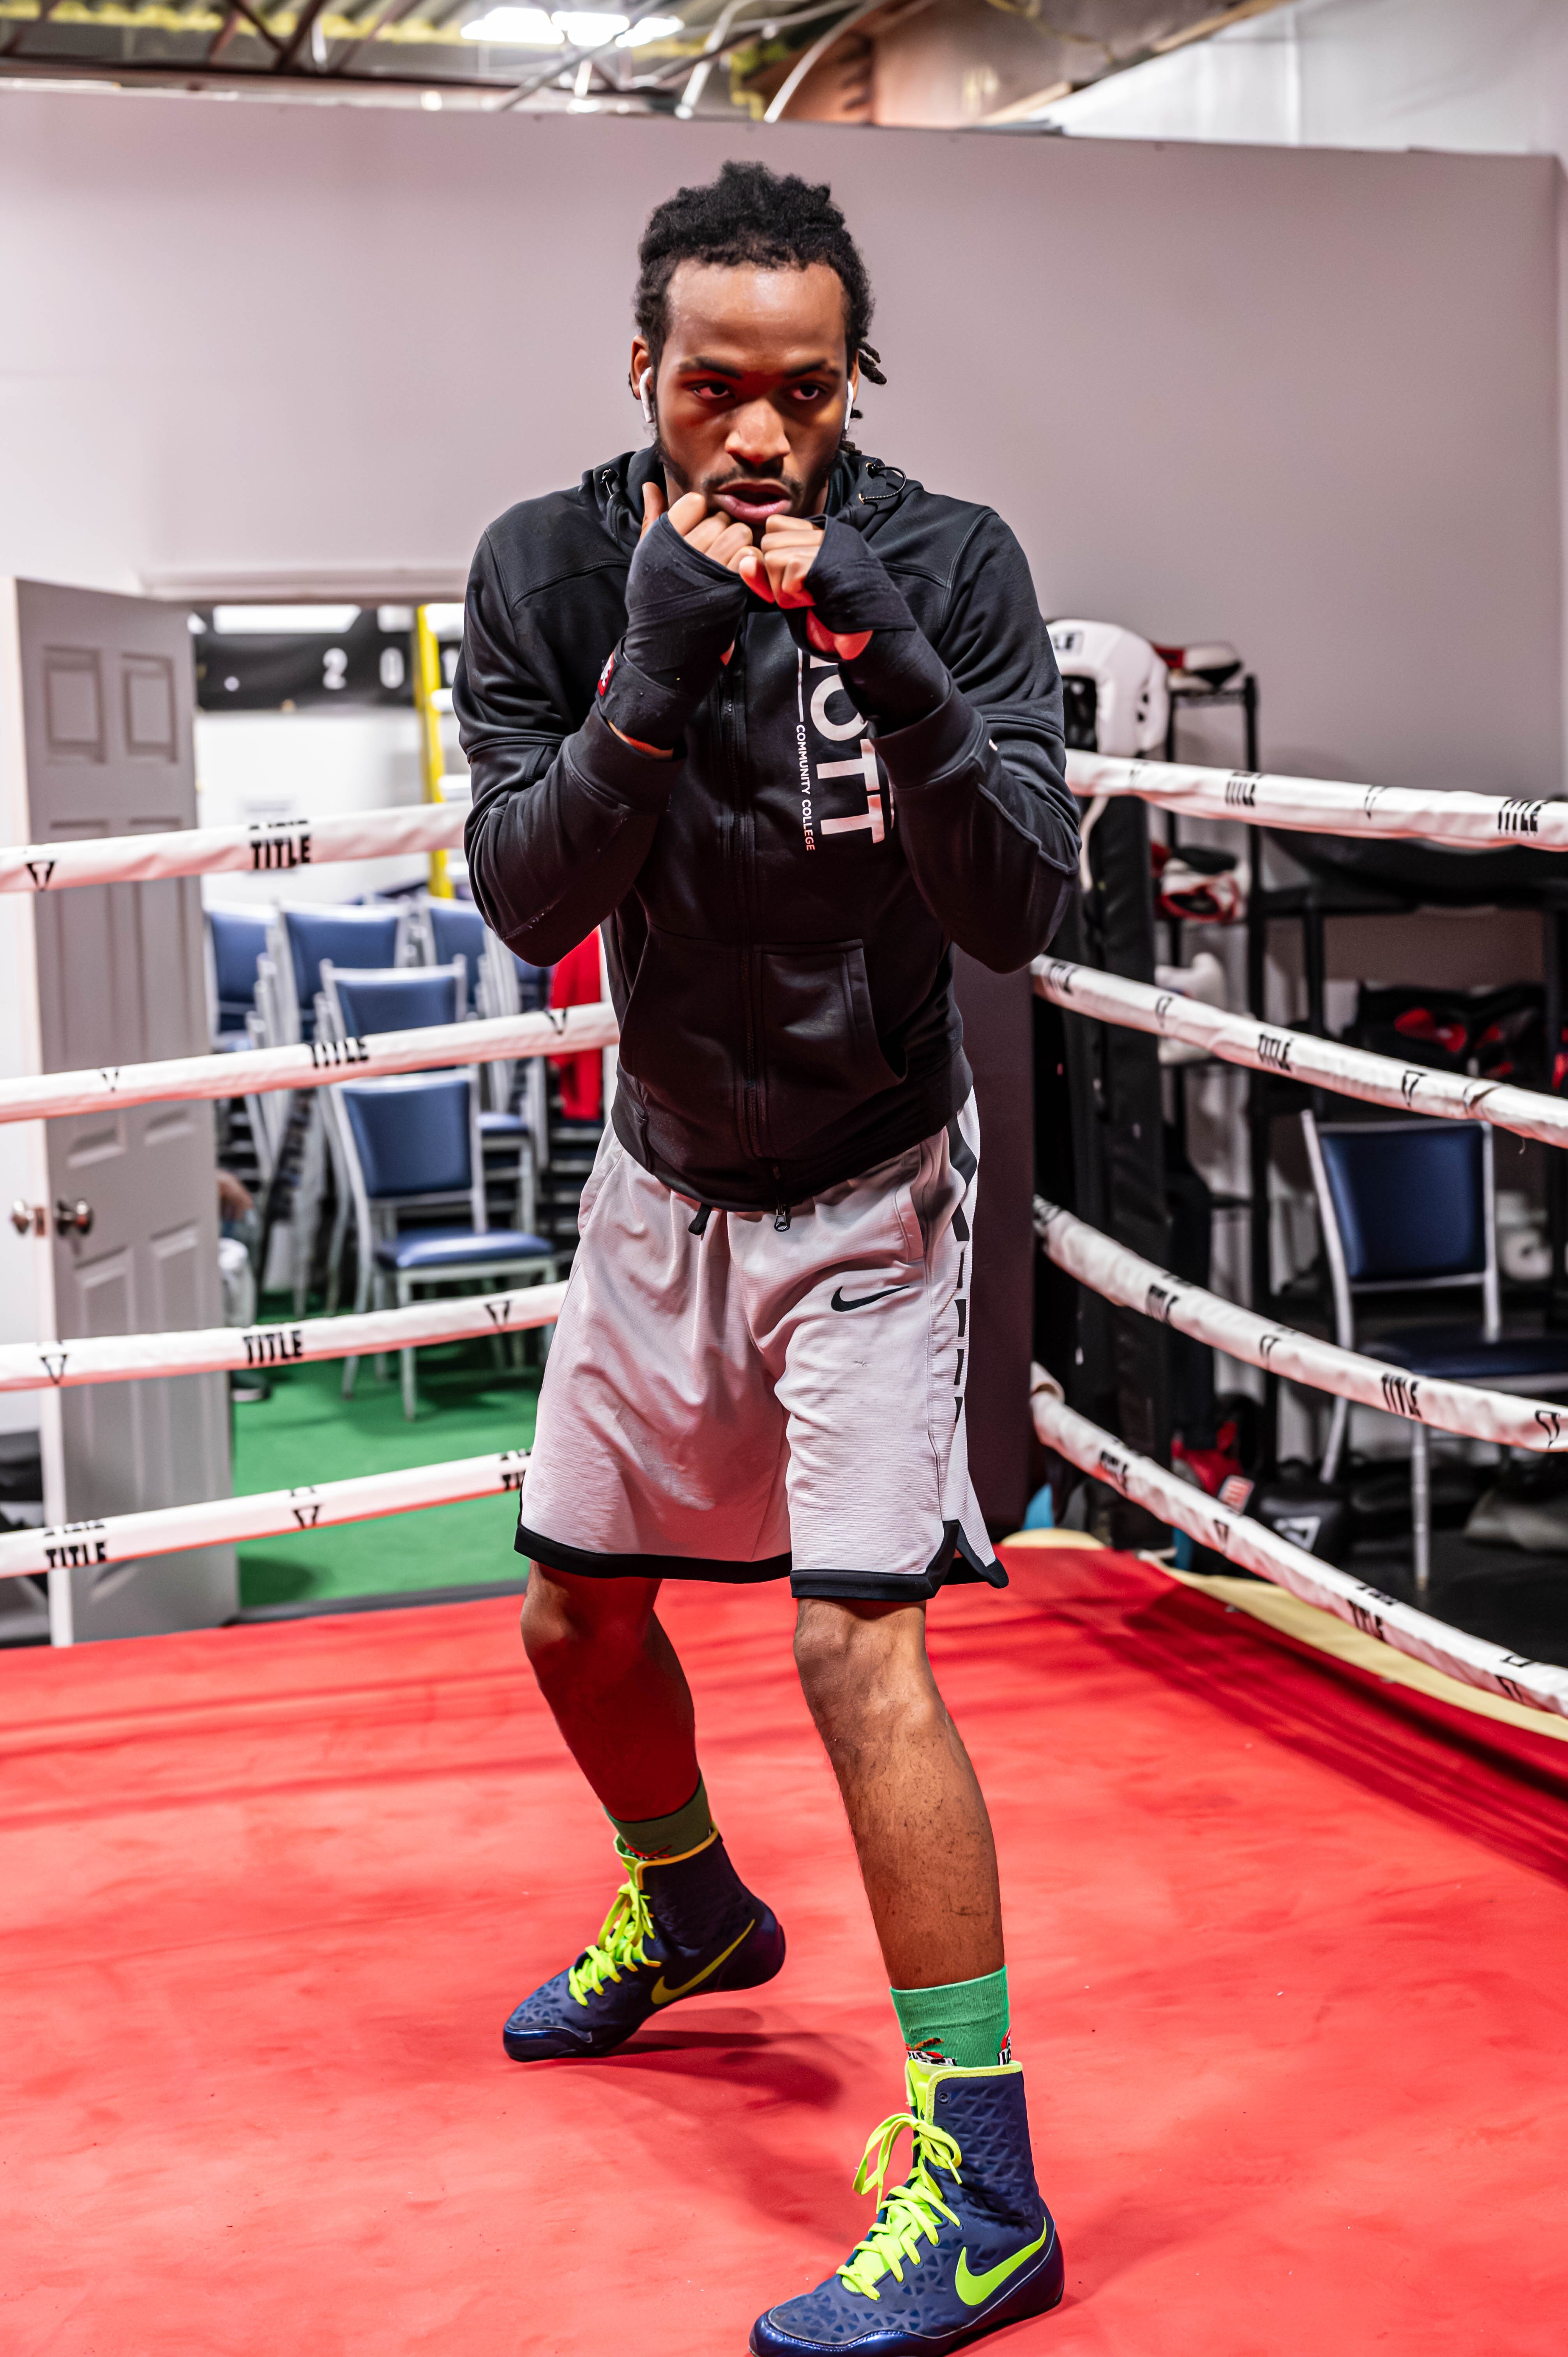 Jaylyn Nichols works on his footwork as he prepares for the fight.